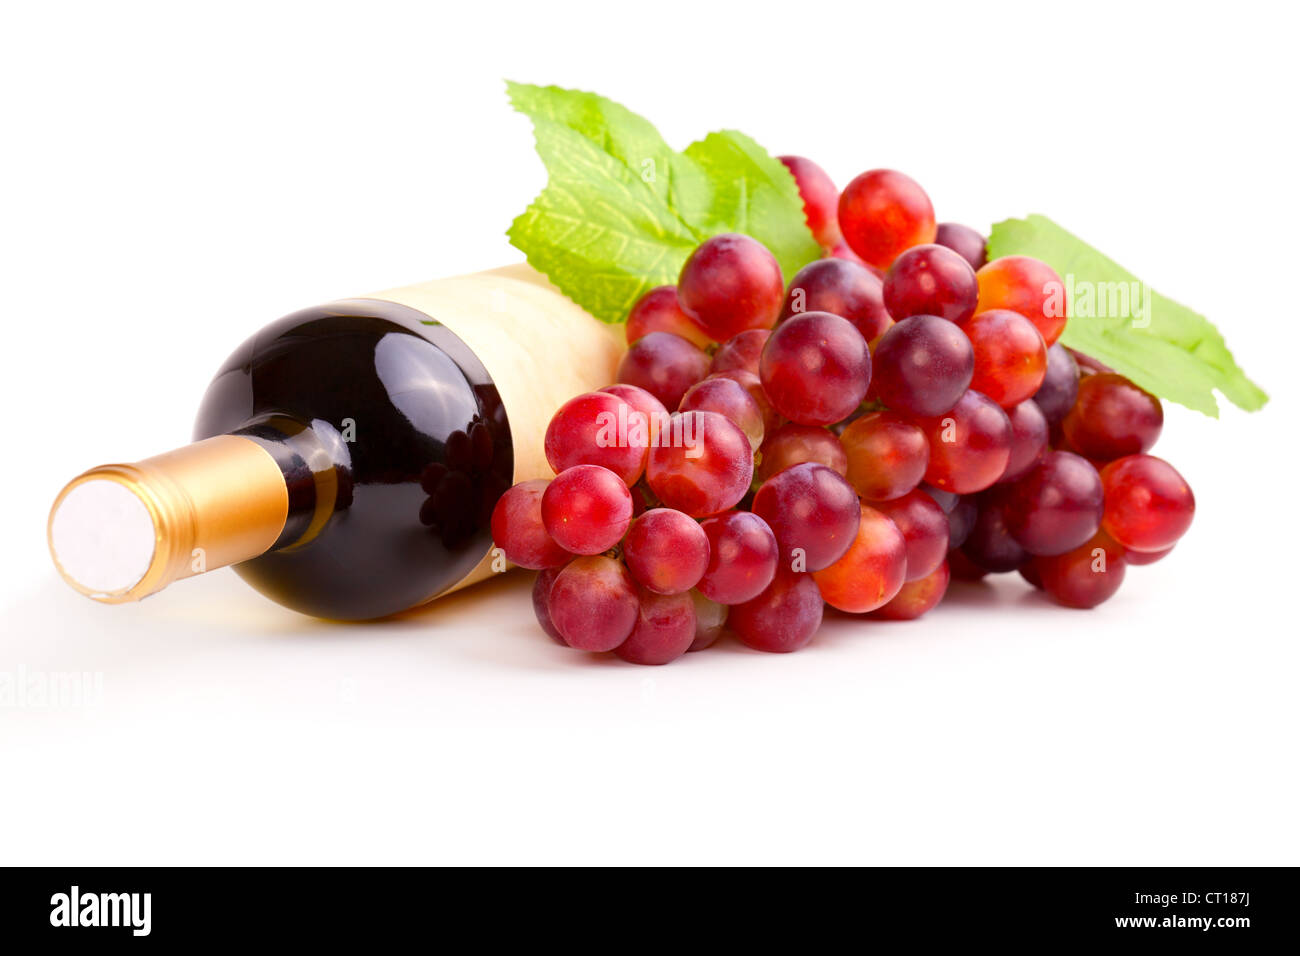 bottle of red wine and grapes, isolated on white background. Stock Photo